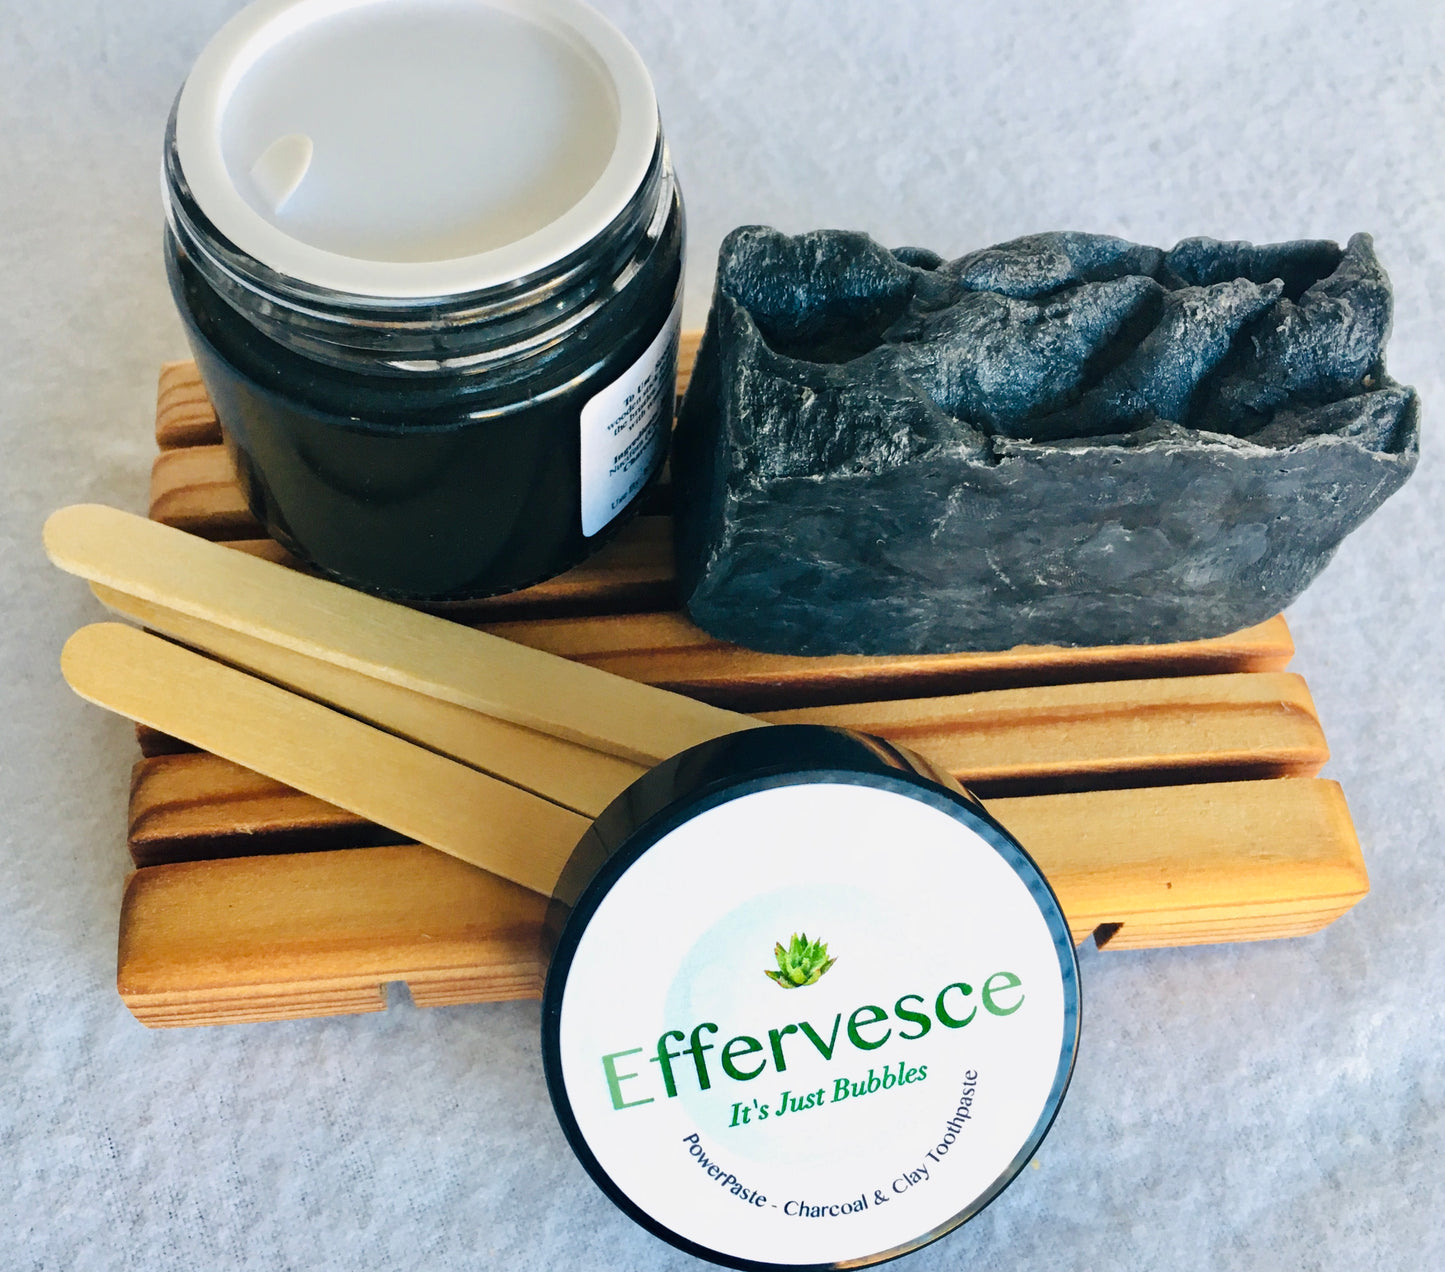 Face Soap - Charcoal Flower for Dry, Mature, or Normal Skin - 2.5oz, Effervesce.ItsJustBubbles, Cosmetic Soap, bamboo-charcoal-tea-tree-natural-facial-soaps-2-5oz-pore-minimizing-detoxifying-